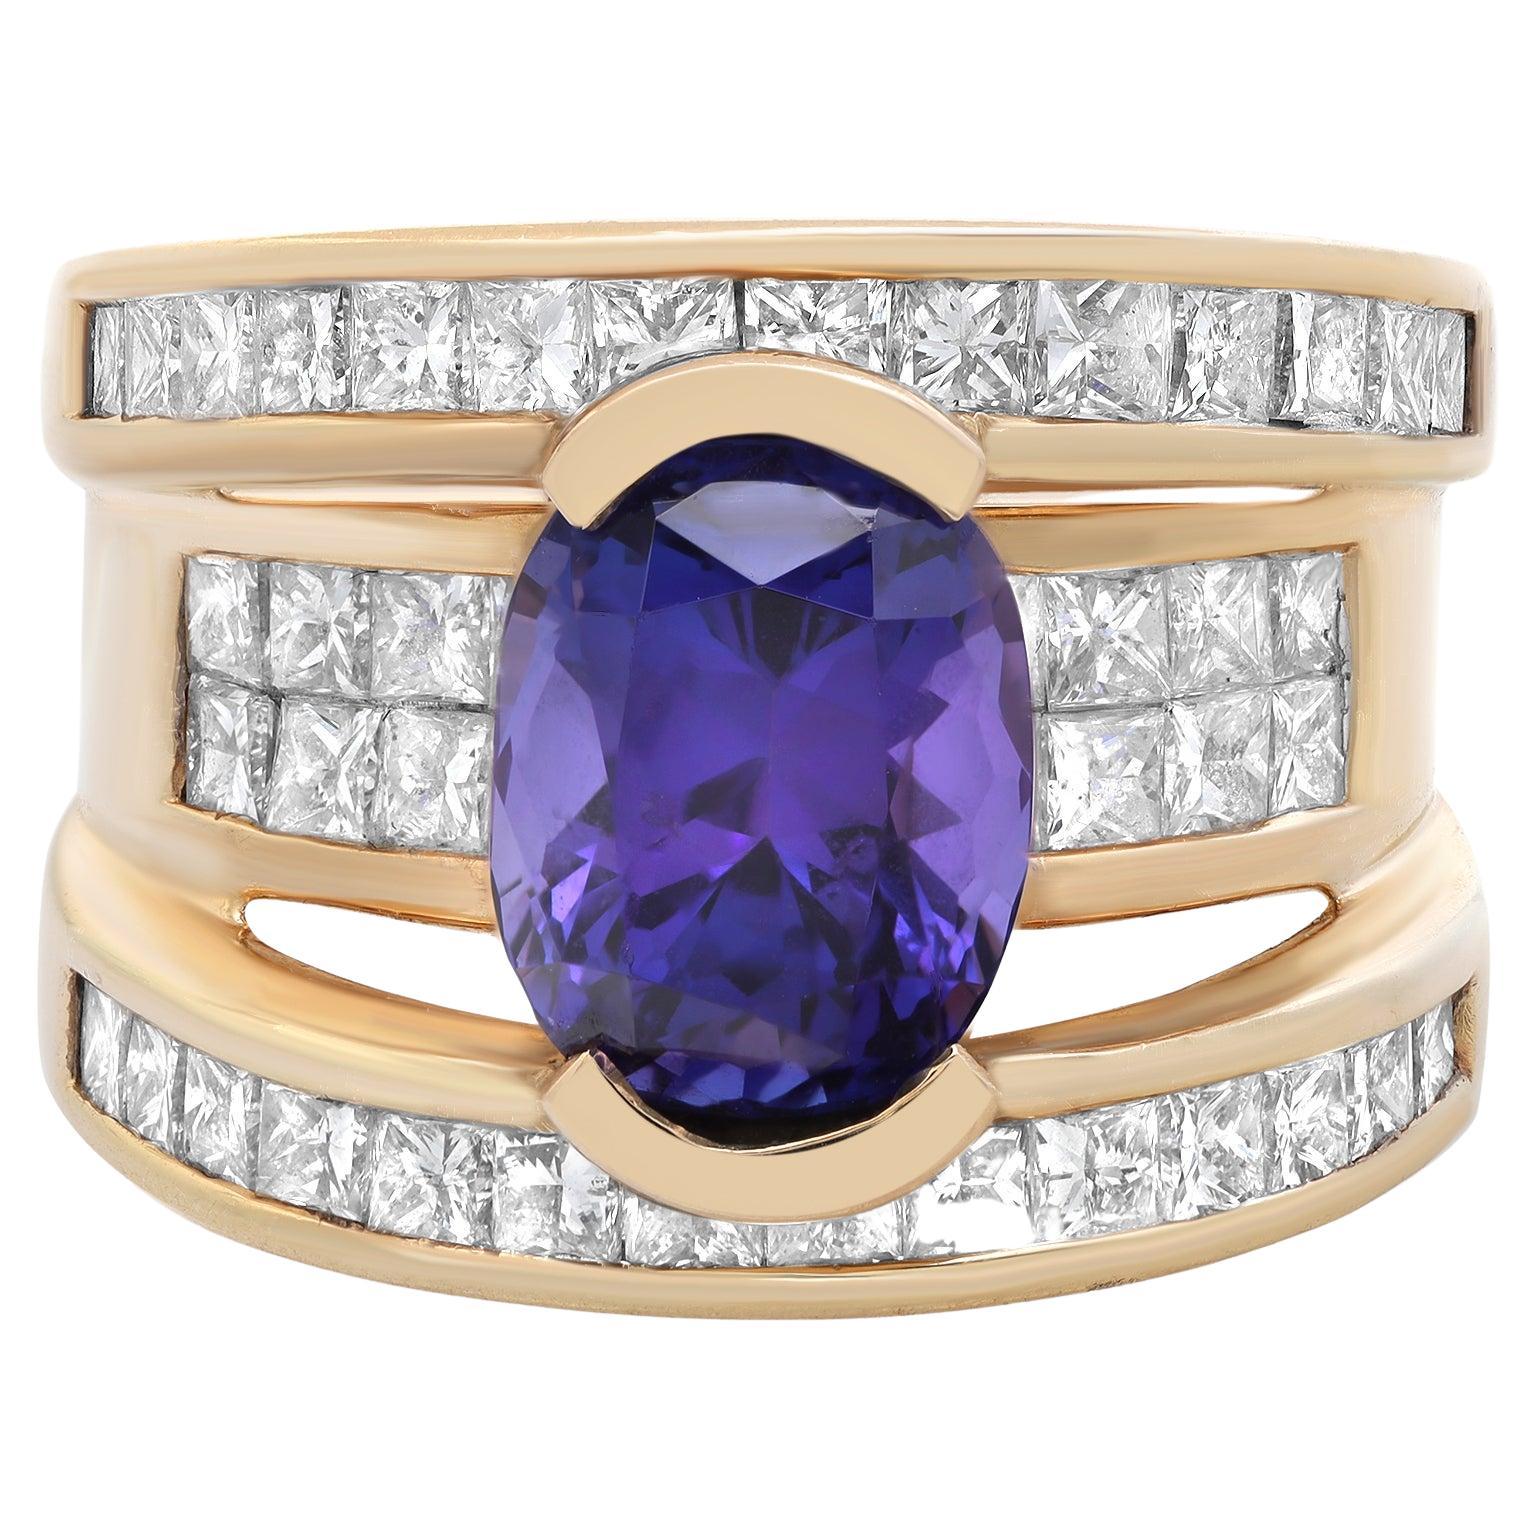 4.05cts Oval Tanzanite & 3.35Cts Diamond Cocktail Ring 14K Yellow Gold For Sale